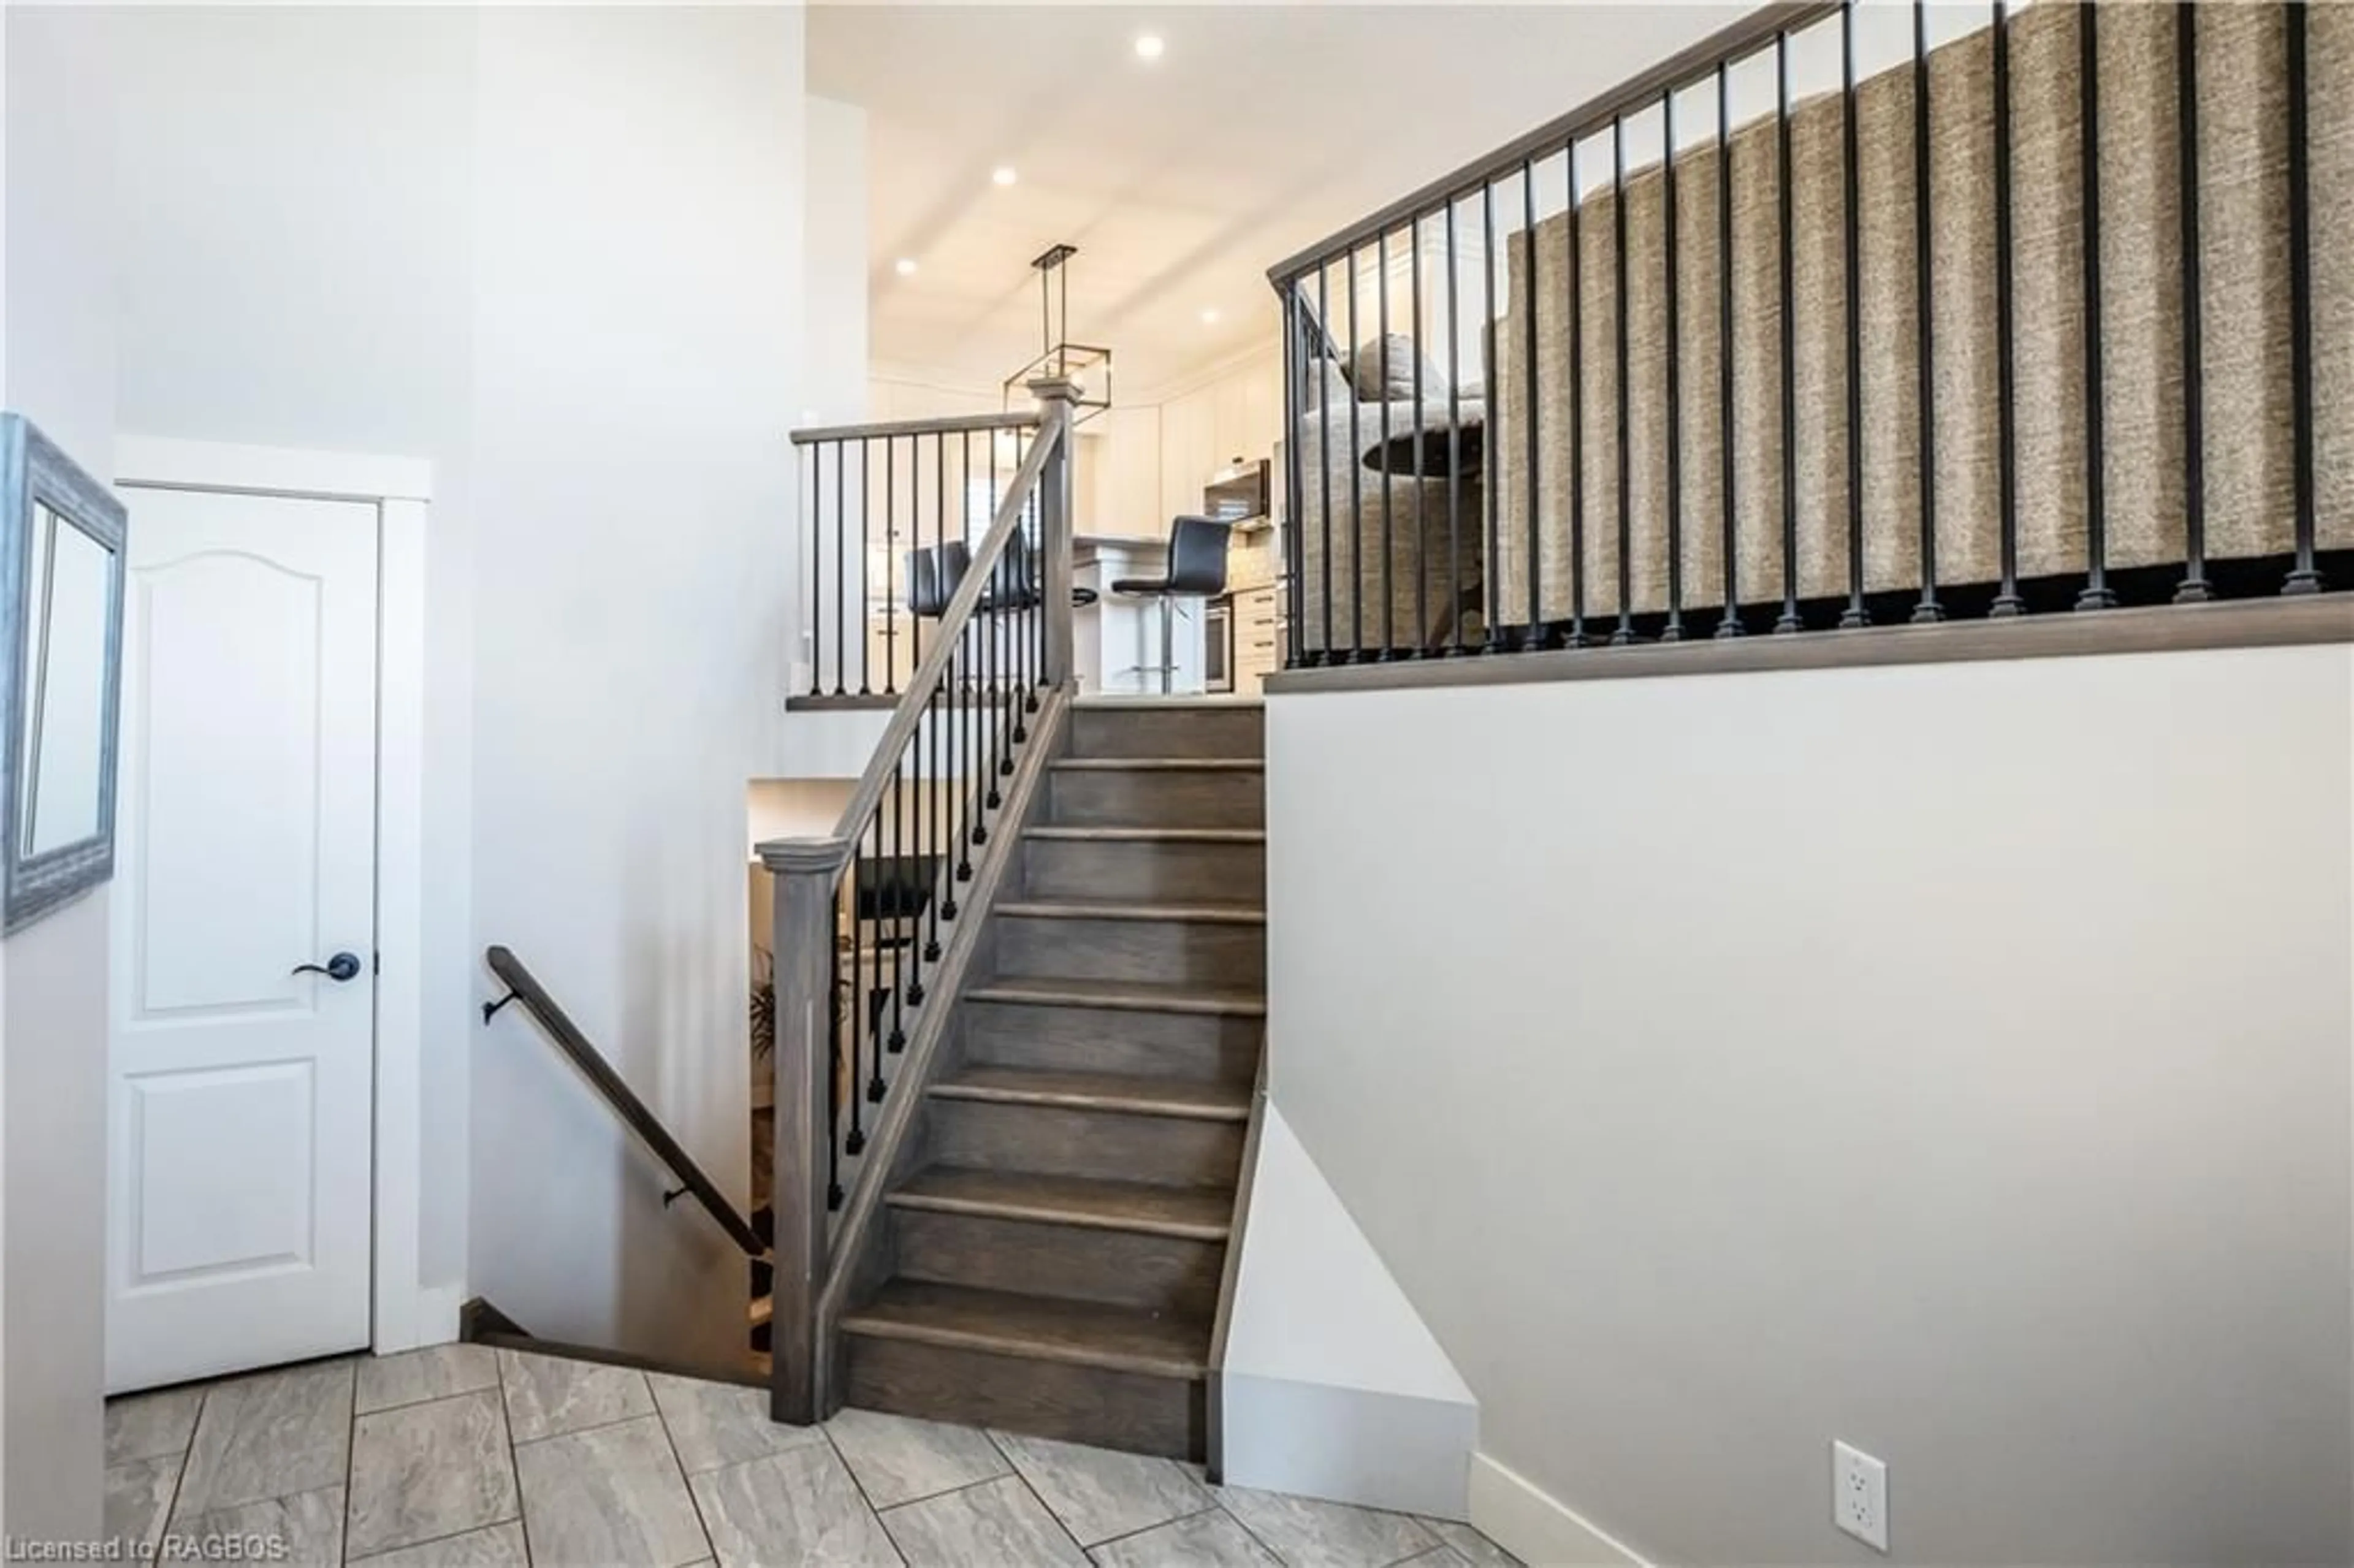 Stairs for 395 Northport Dr, Port Elgin Ontario N0H 2C1